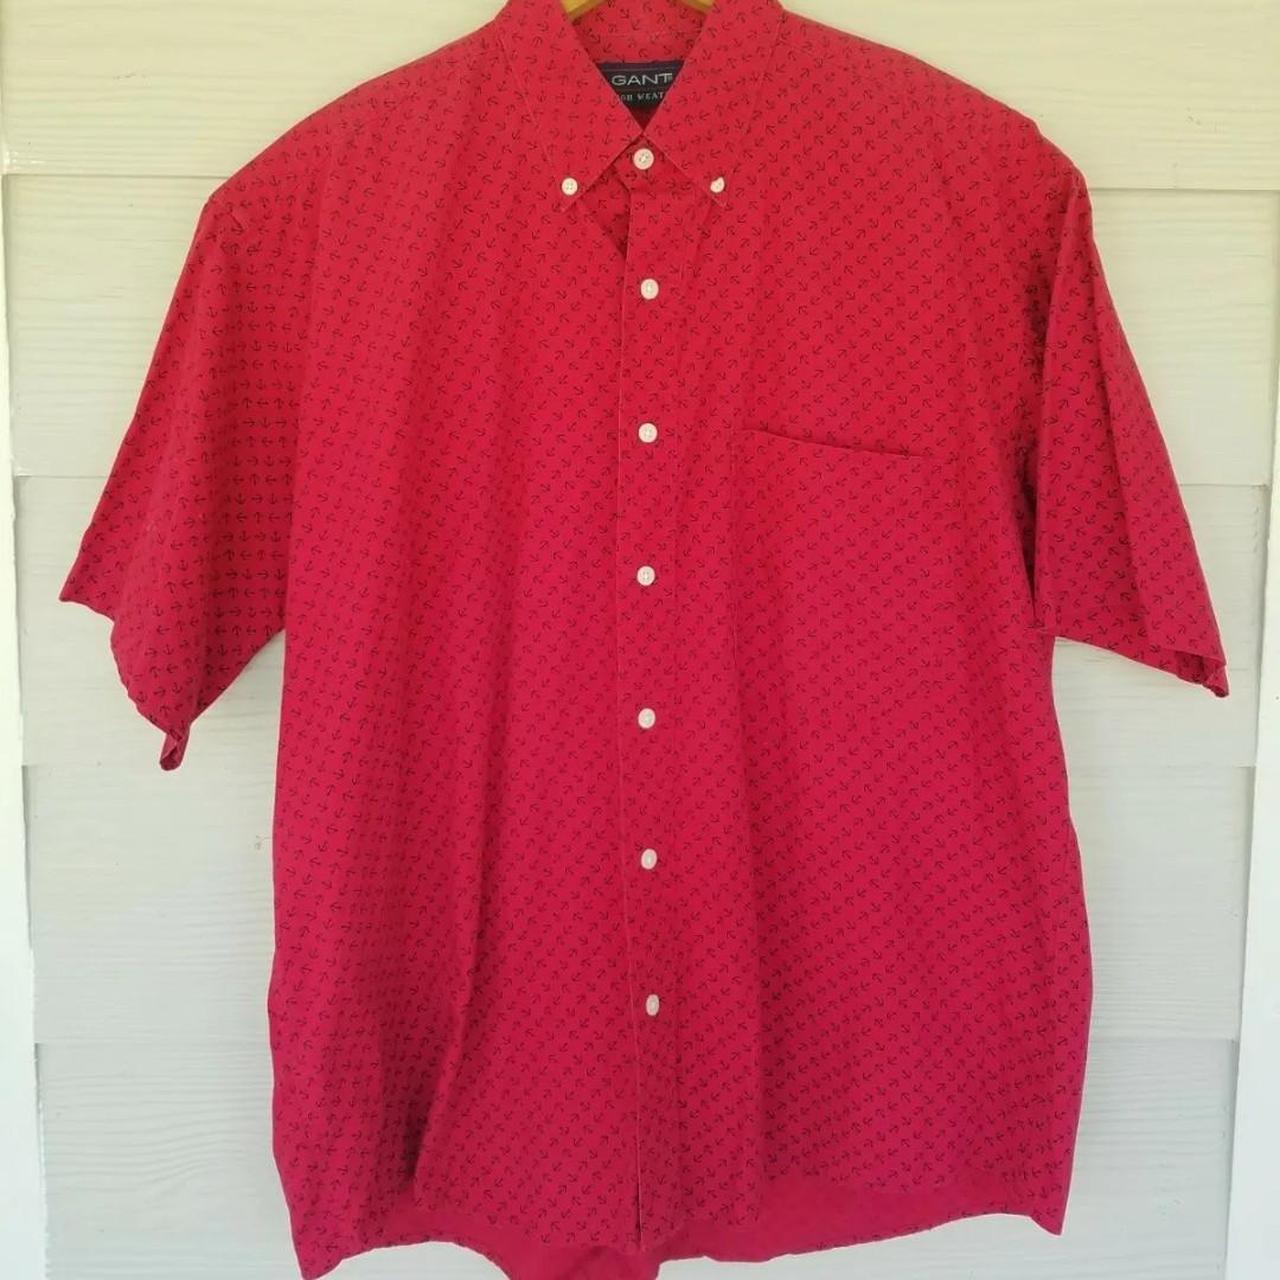 GANT Men's Red and Blue Shirt